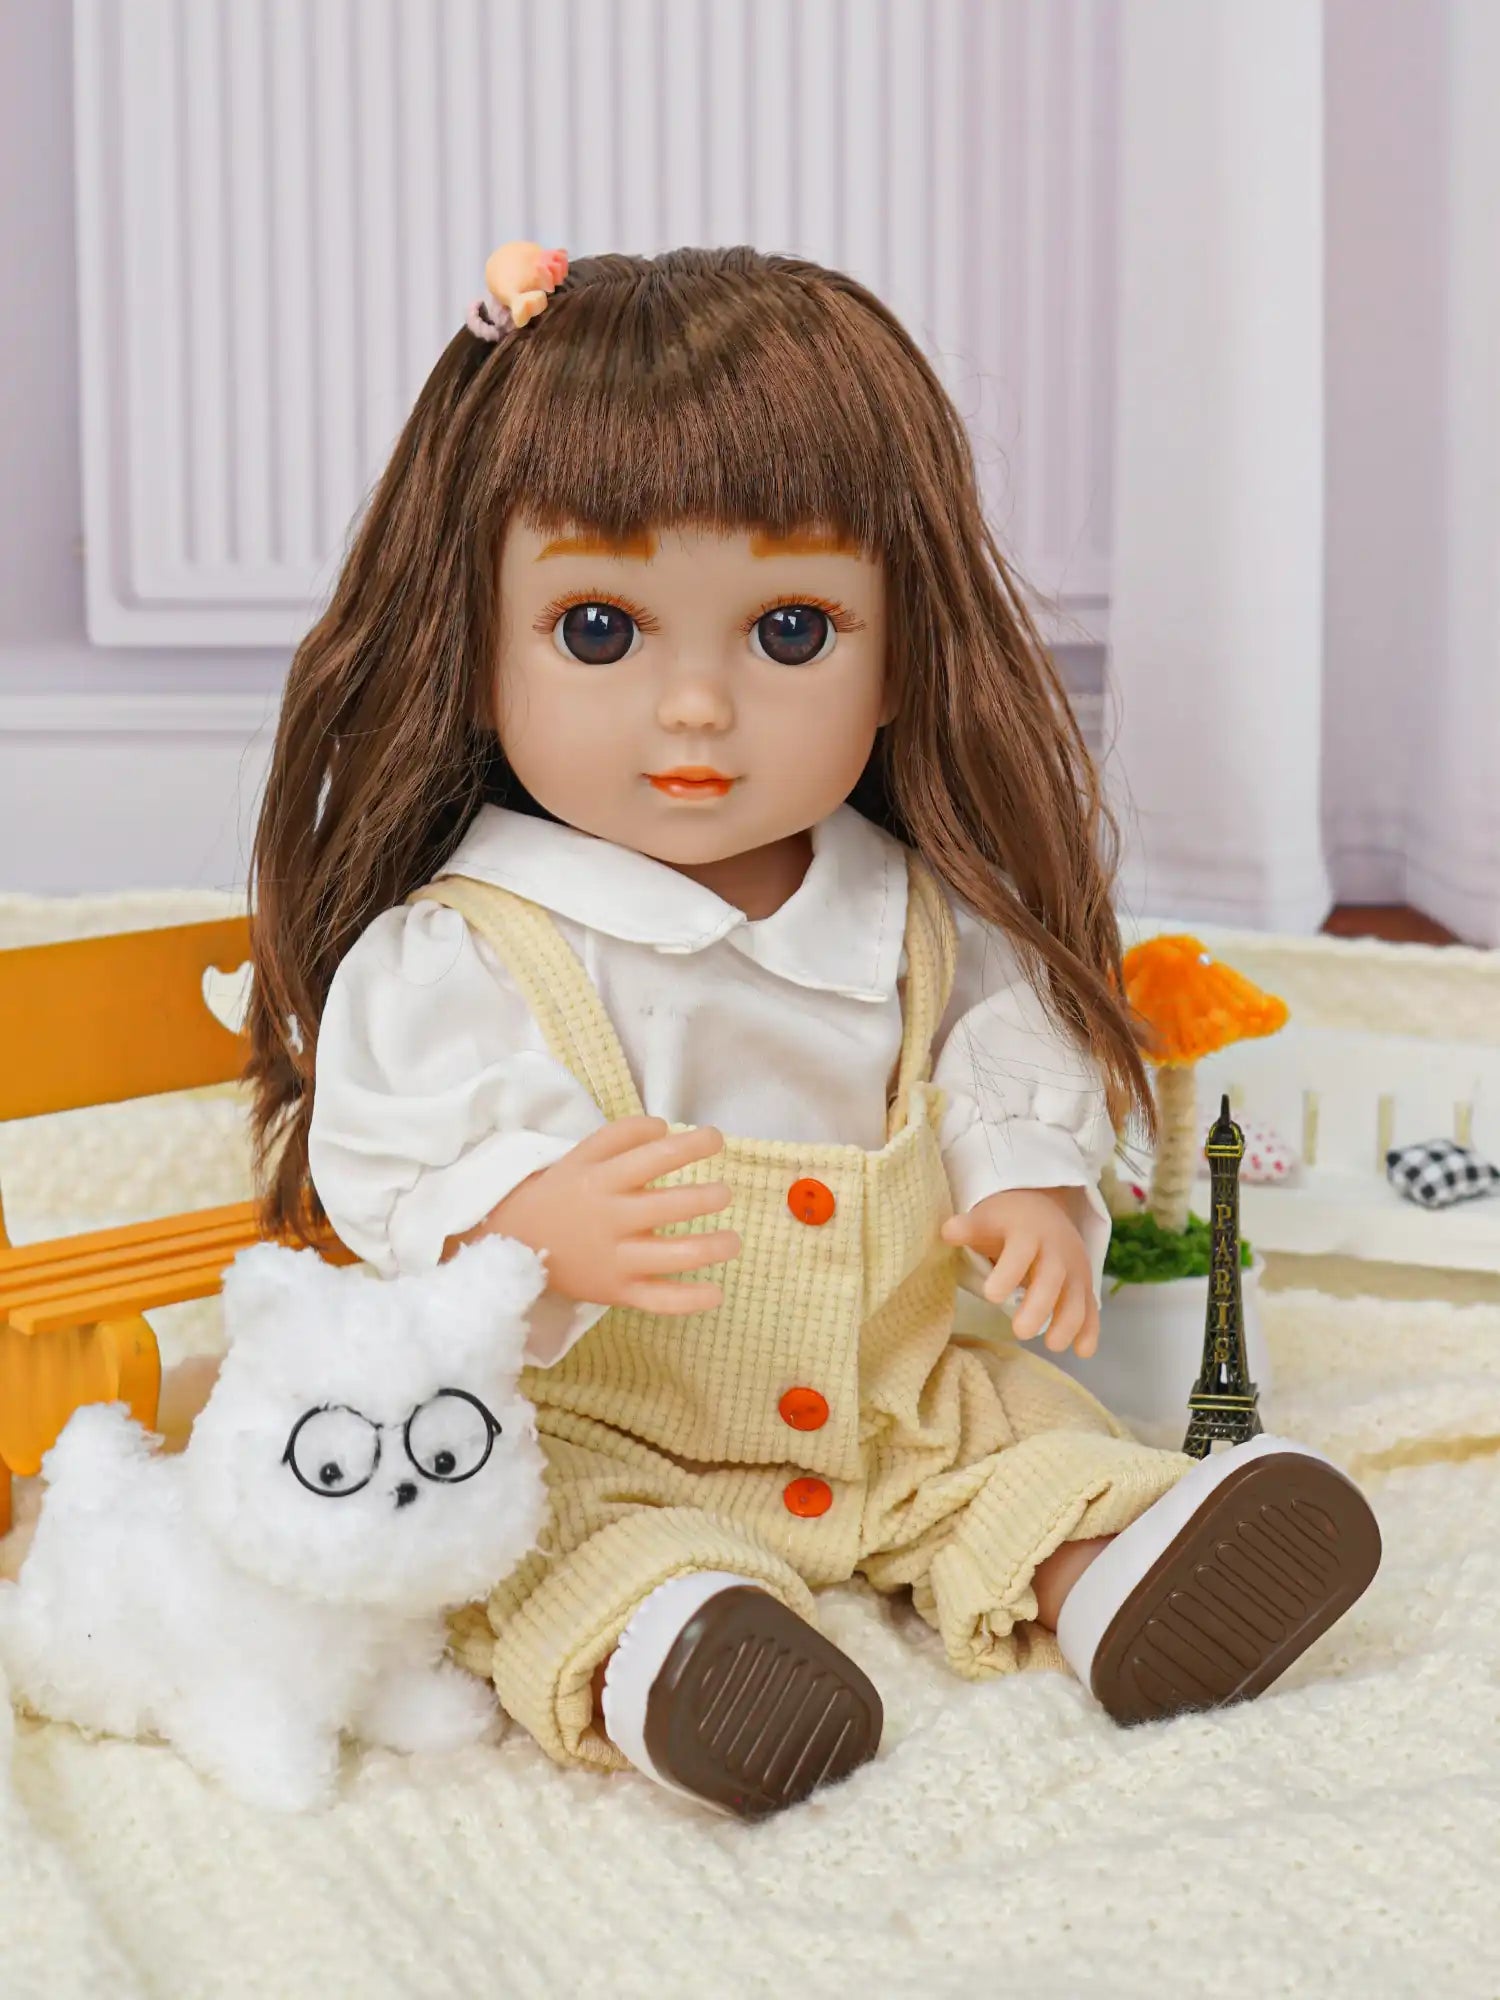 Childlike doll in white and yellow, with a toy dog and miniature Eiffel Tower.